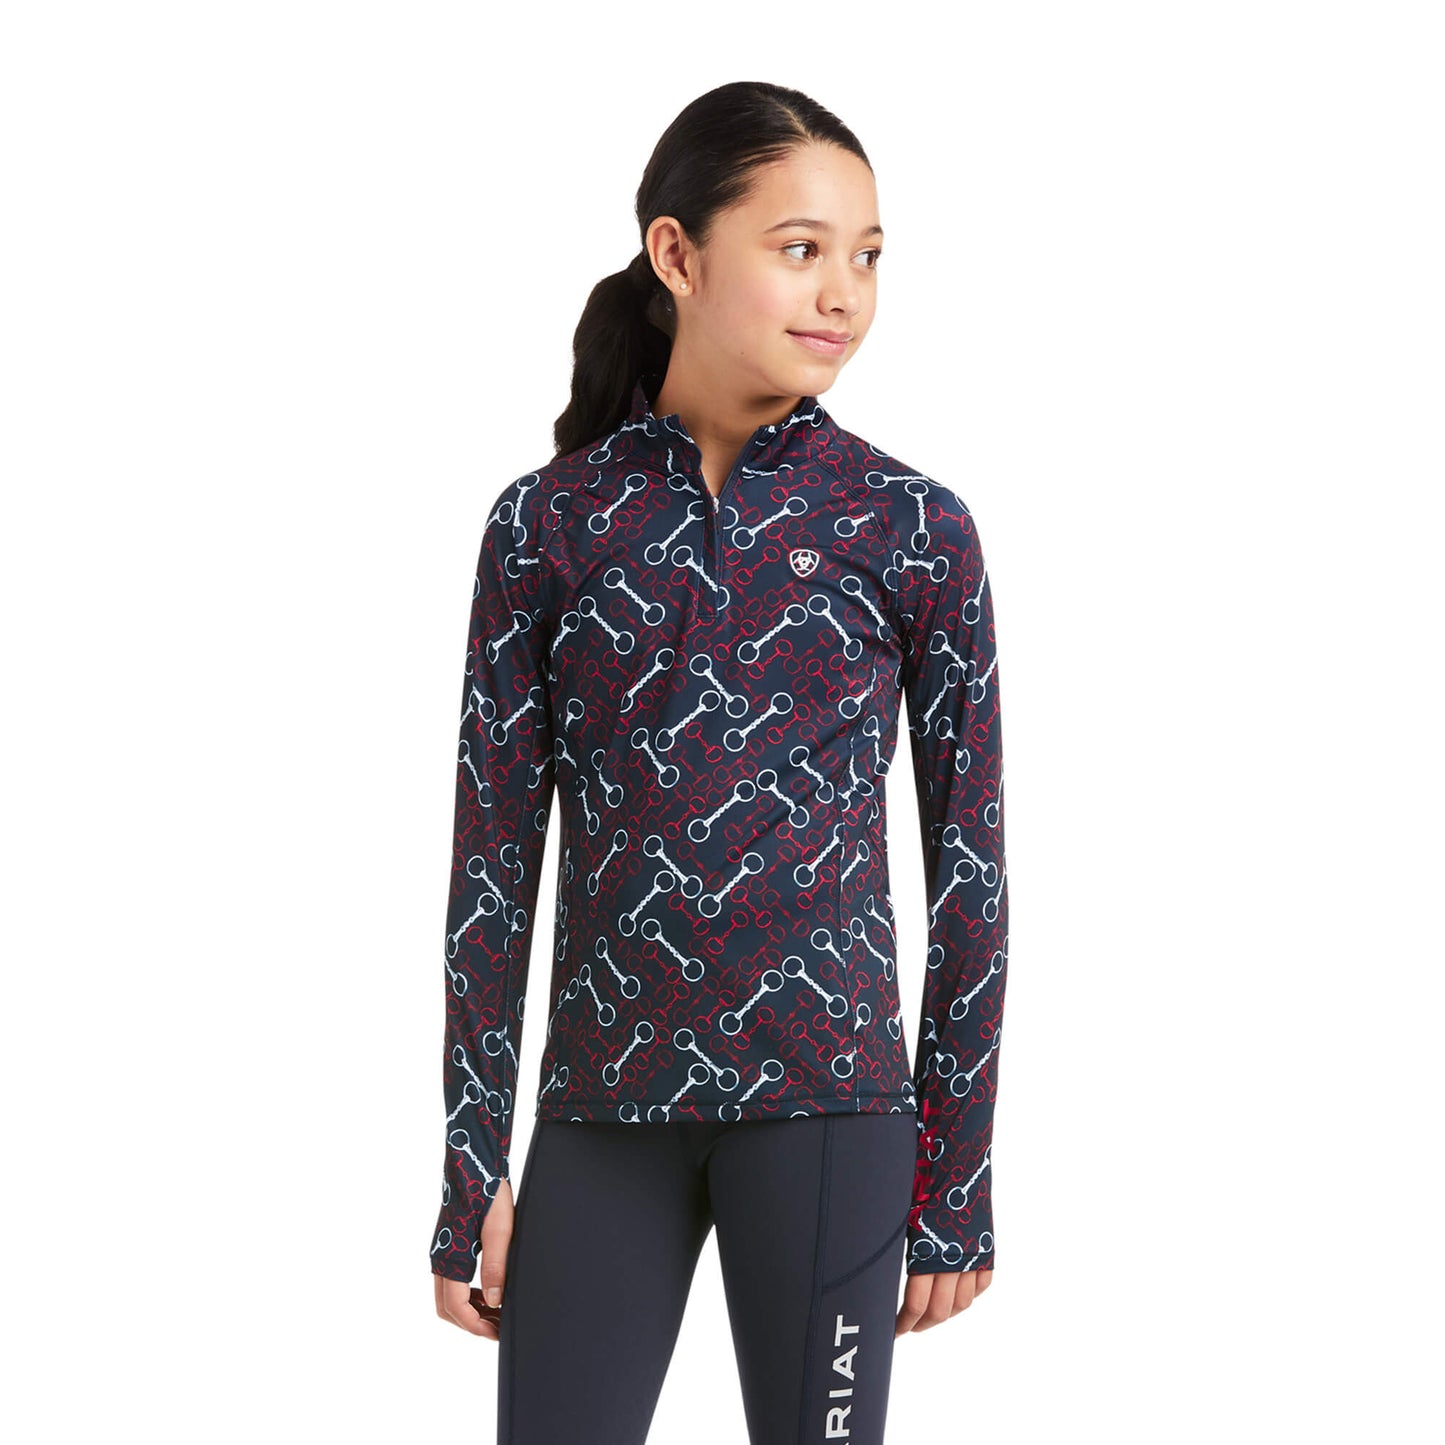 Ariat Youth Lowell 2.0 Team Print 1/4 Zip Baselayer Pullover 10037460